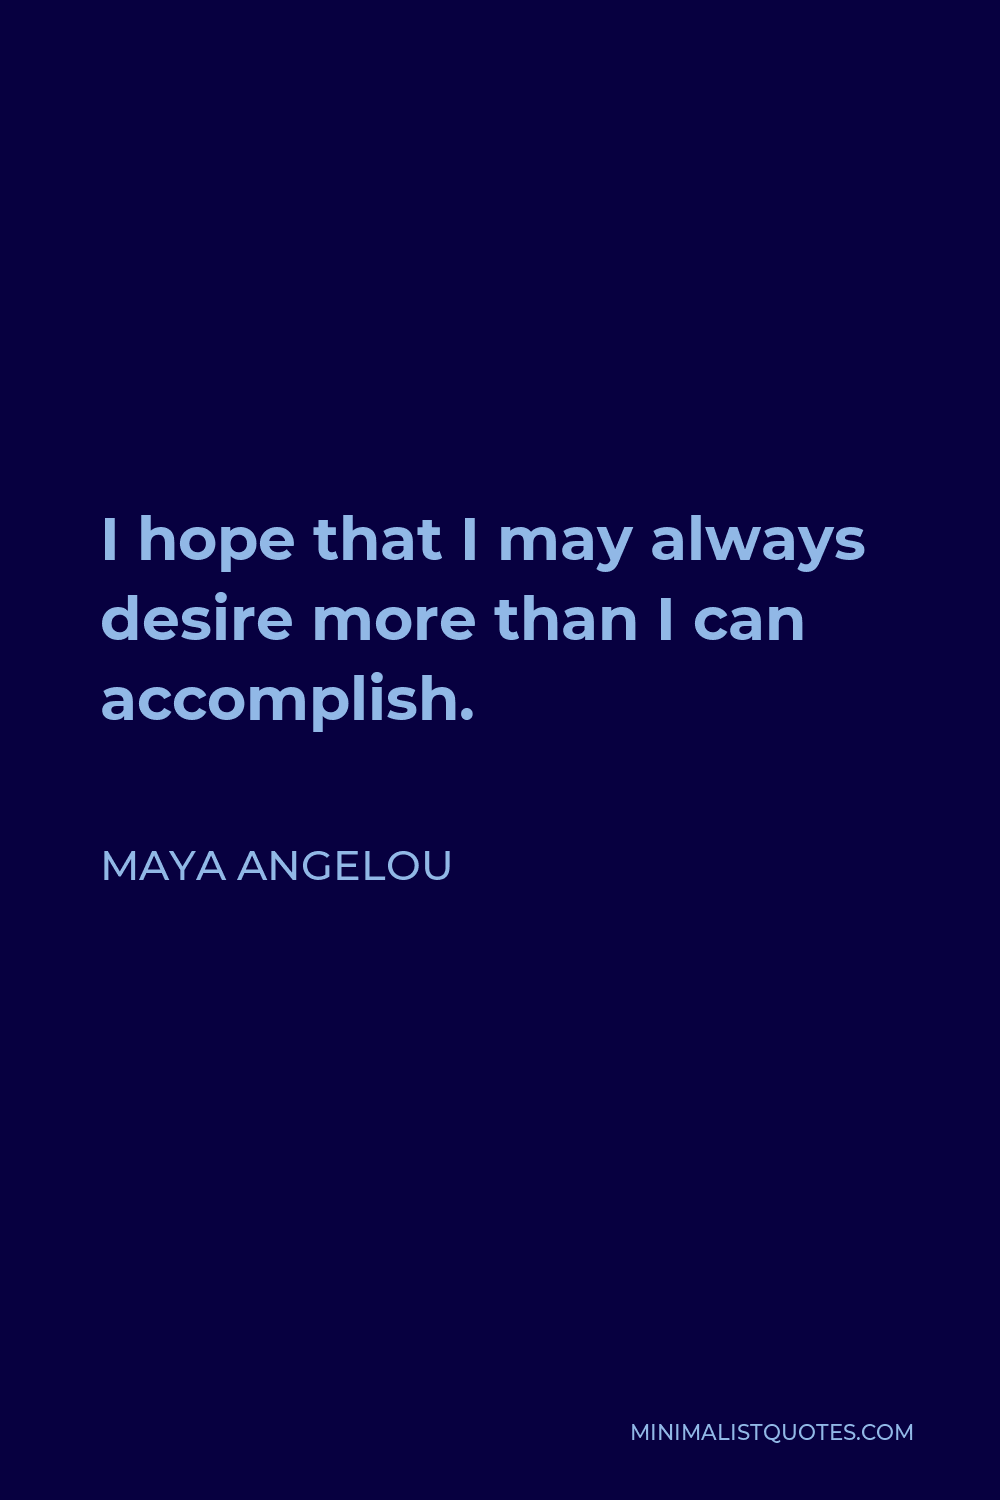 Maya Angelou Quote - I hope that I may always desire more than I can accomplish.